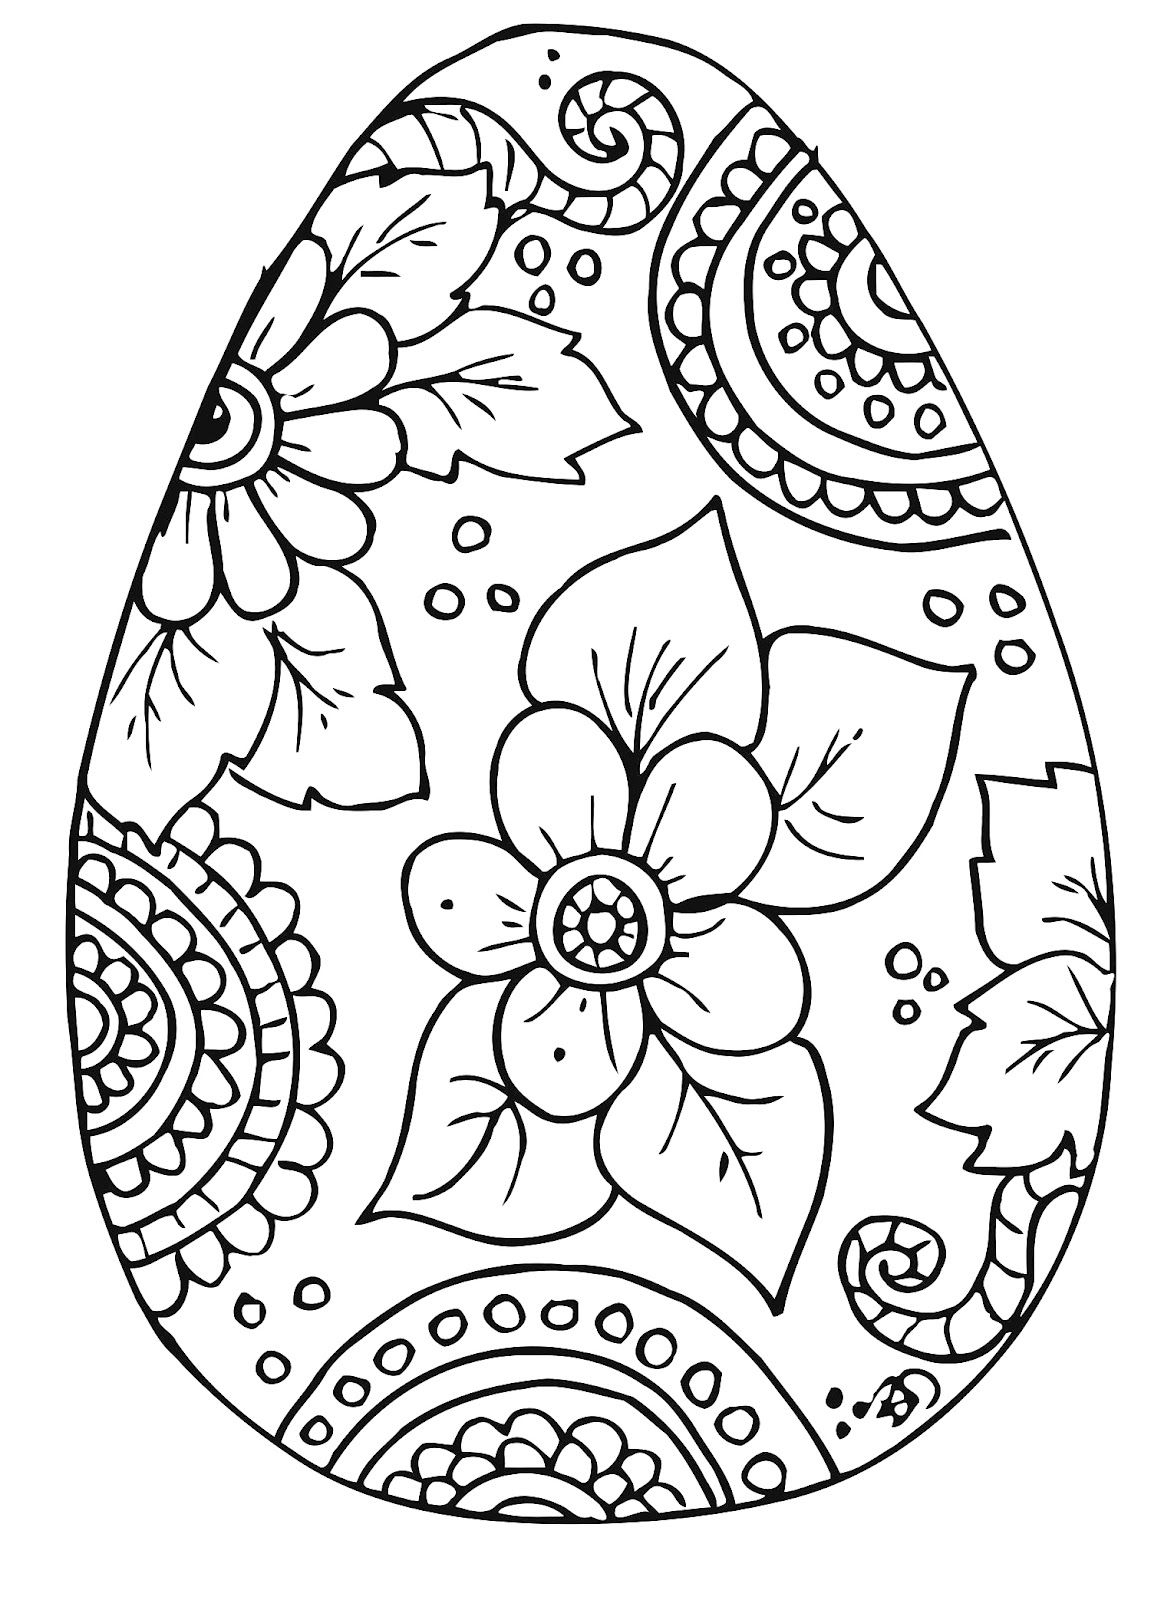 10 Cool Free Printable Easter Coloring Pages For Kids Who&amp;#039;ve Moved - Free Printable Easter Coloring Pictures